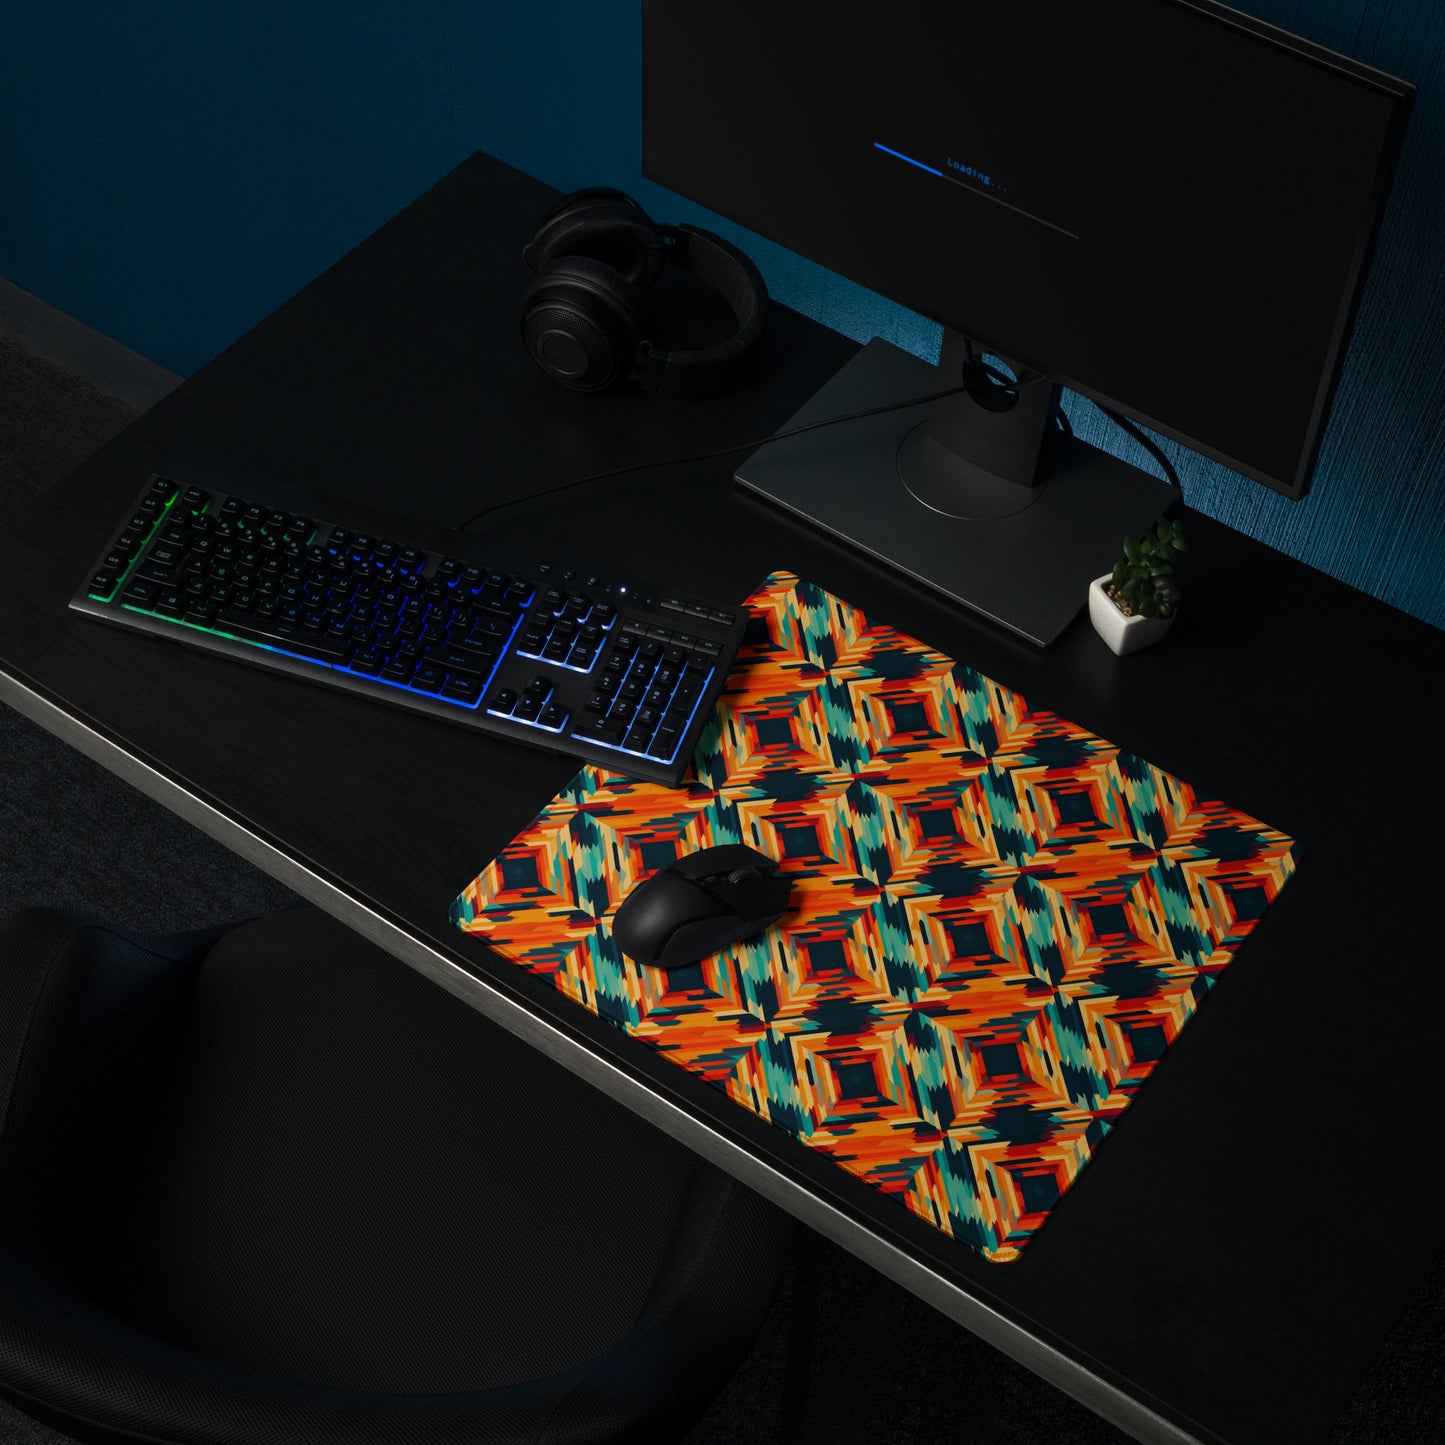 An 18" x 16" desk pad with a tiled abstract pattern on it shown on a desk setup. Orange in color.